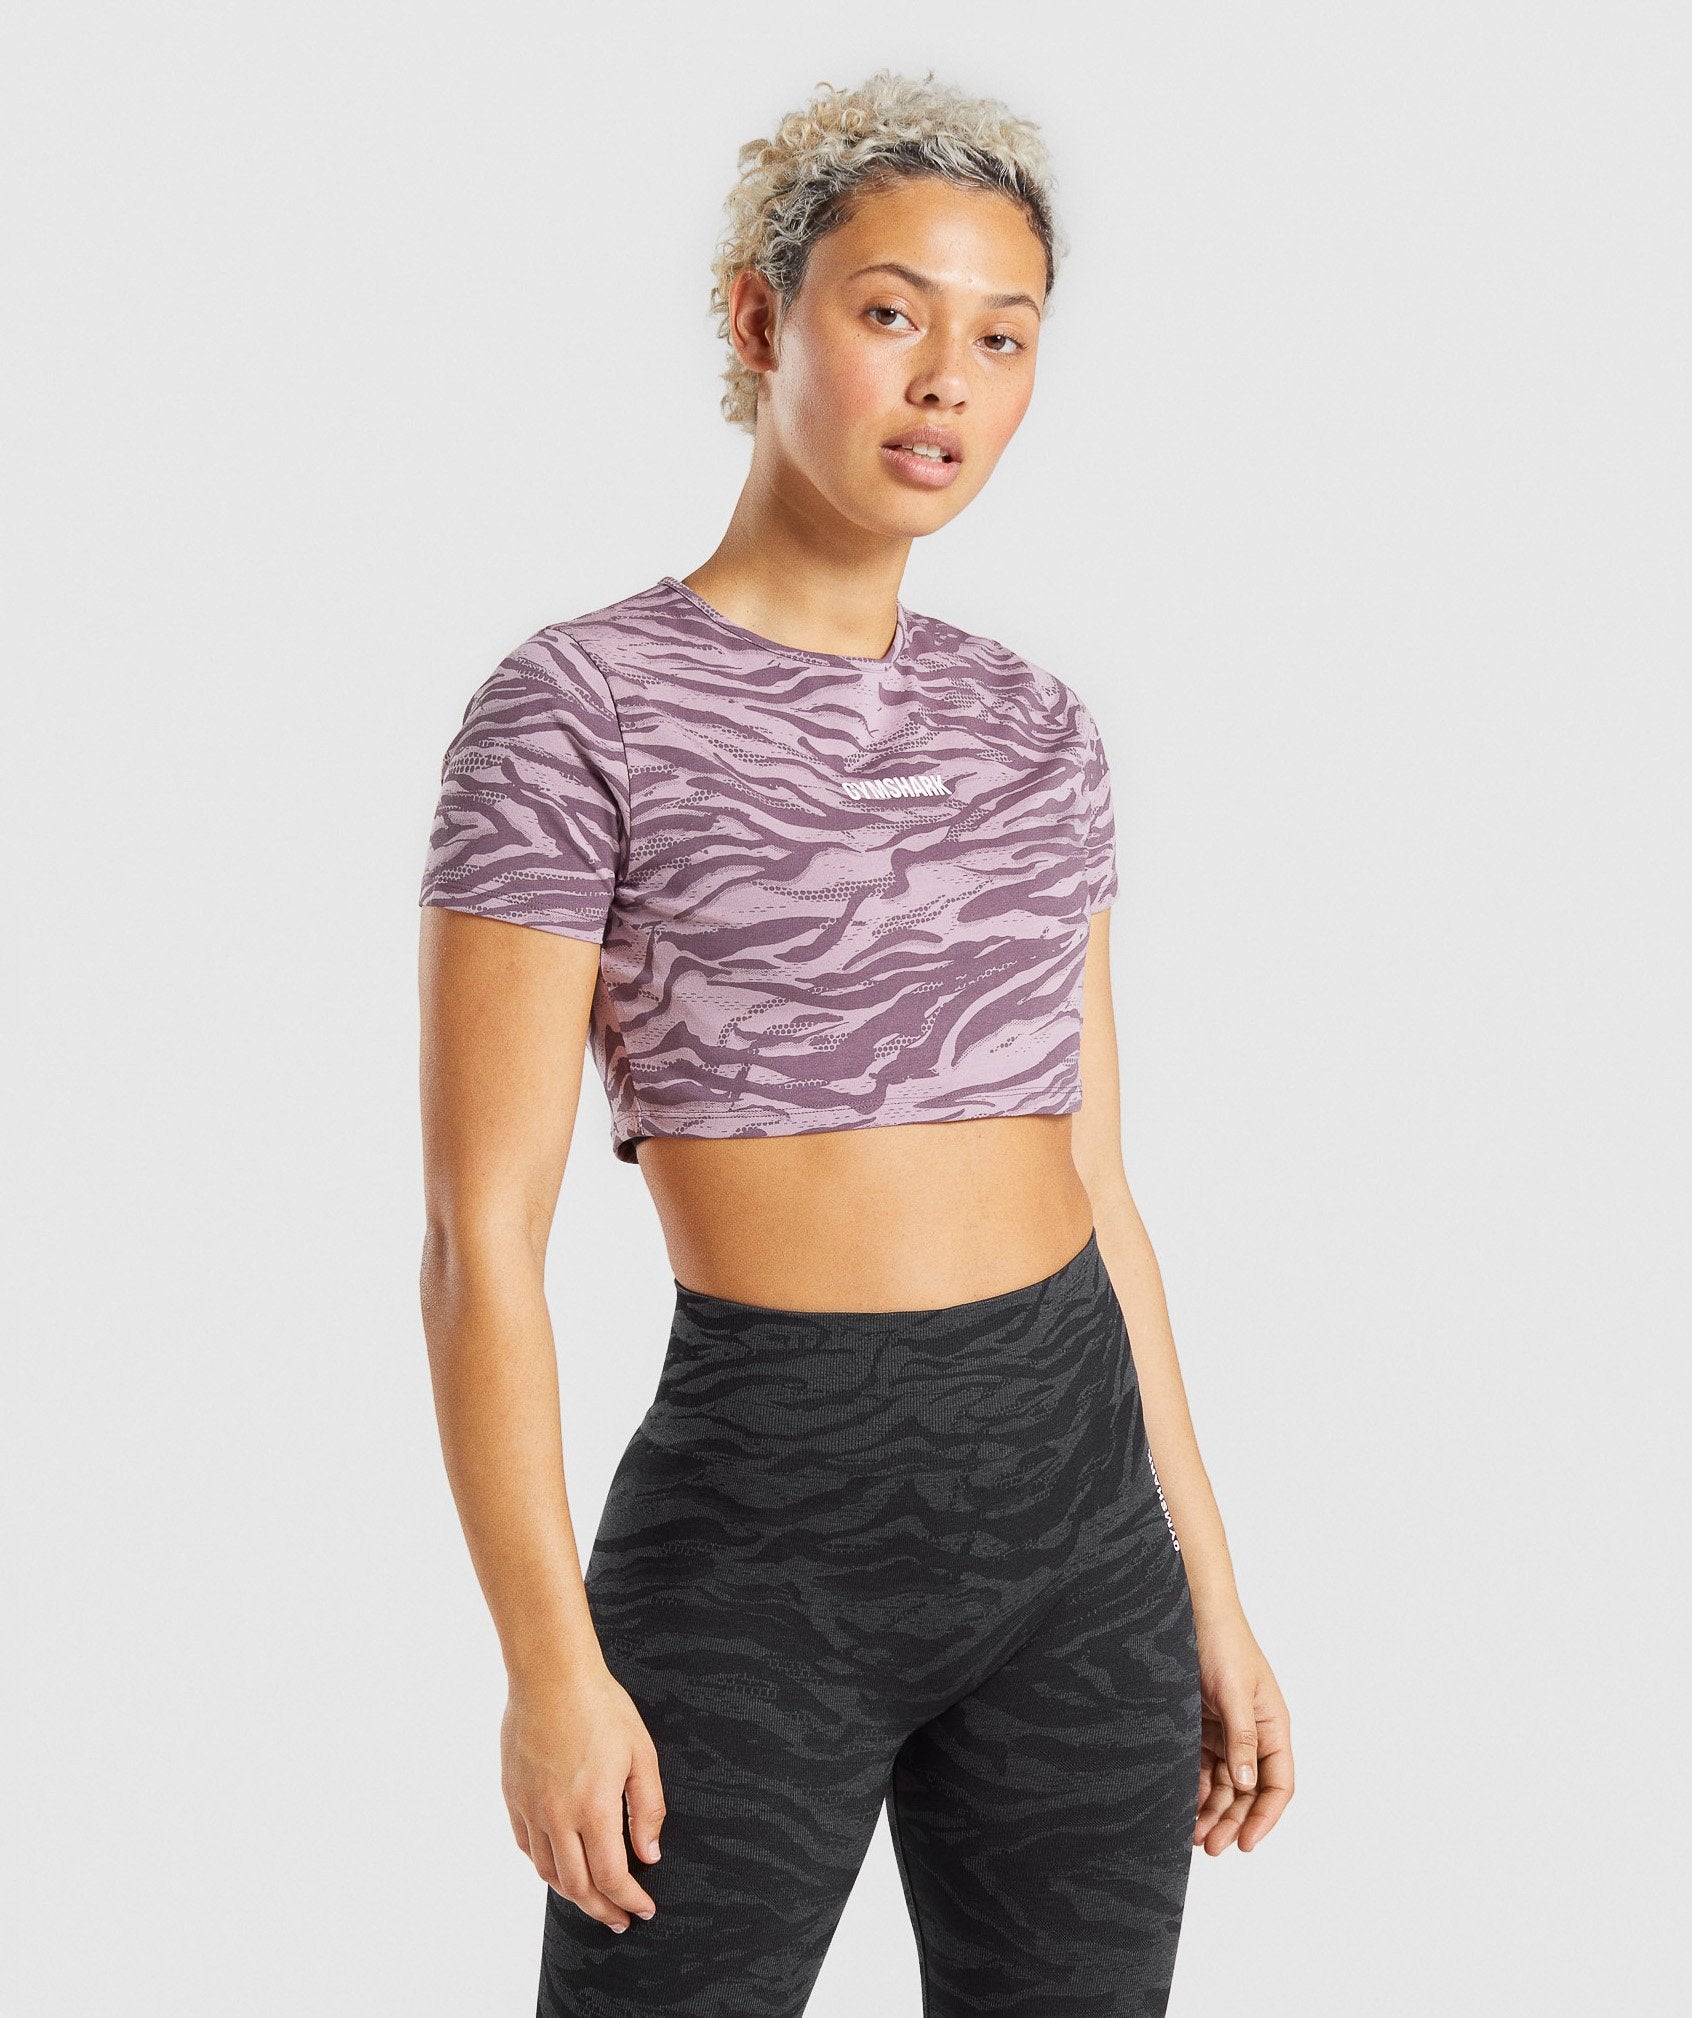 Animal Graphic Crop Top in Purple Print - view 1